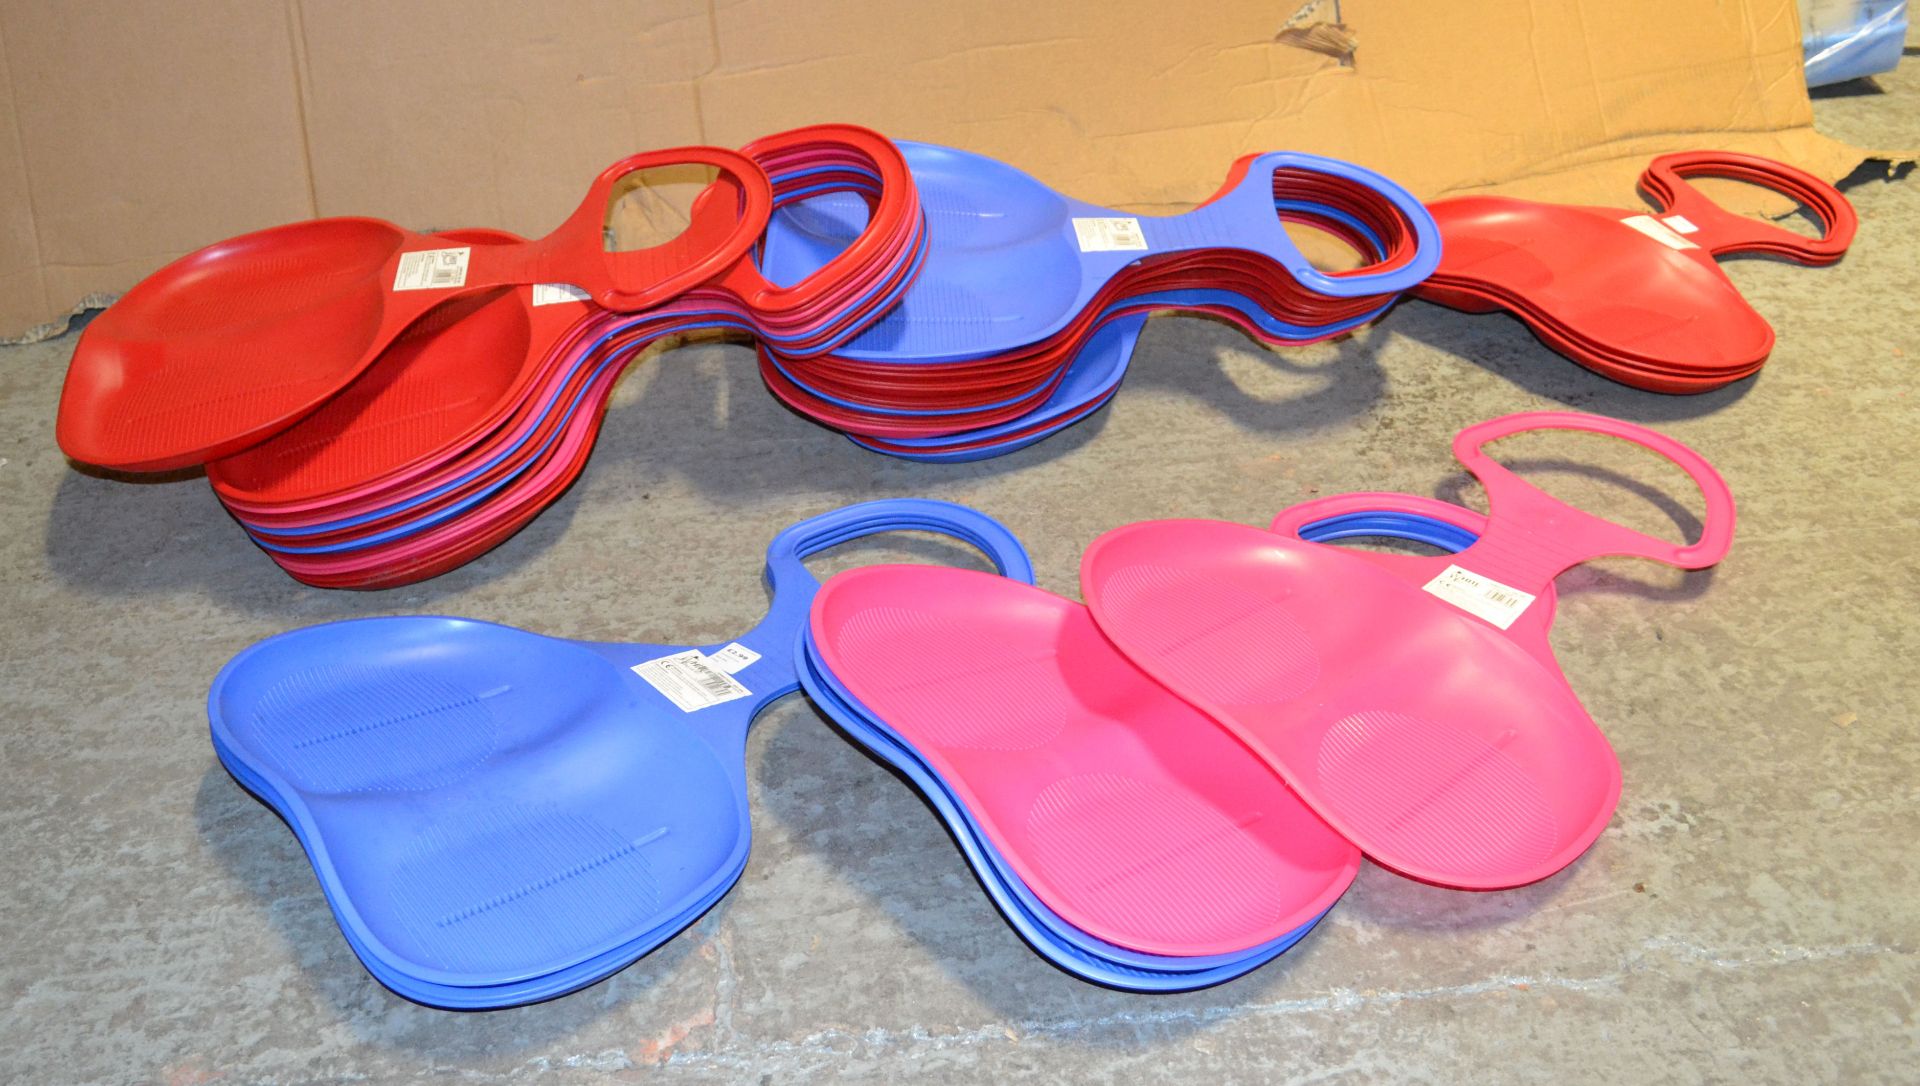 40 x Bum Skid Snow Sledges In Assorted Colours - CL262 - Location: Altrincham WA14 - Image 2 of 5